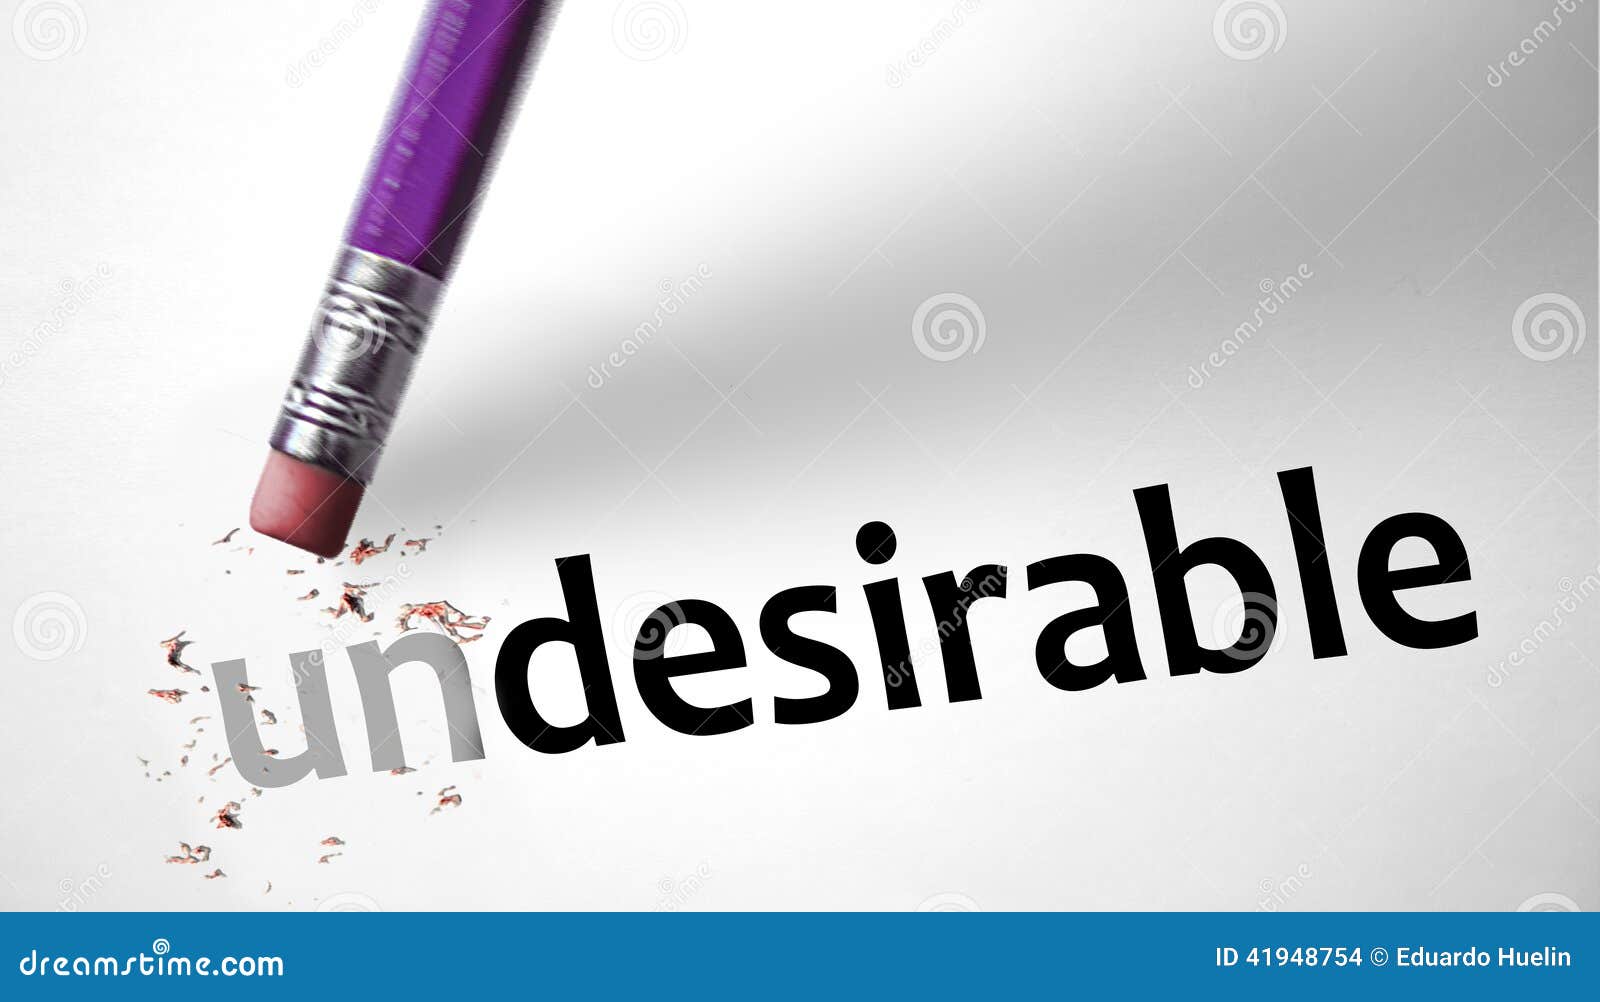 eraser changing the word undesirable for desirable